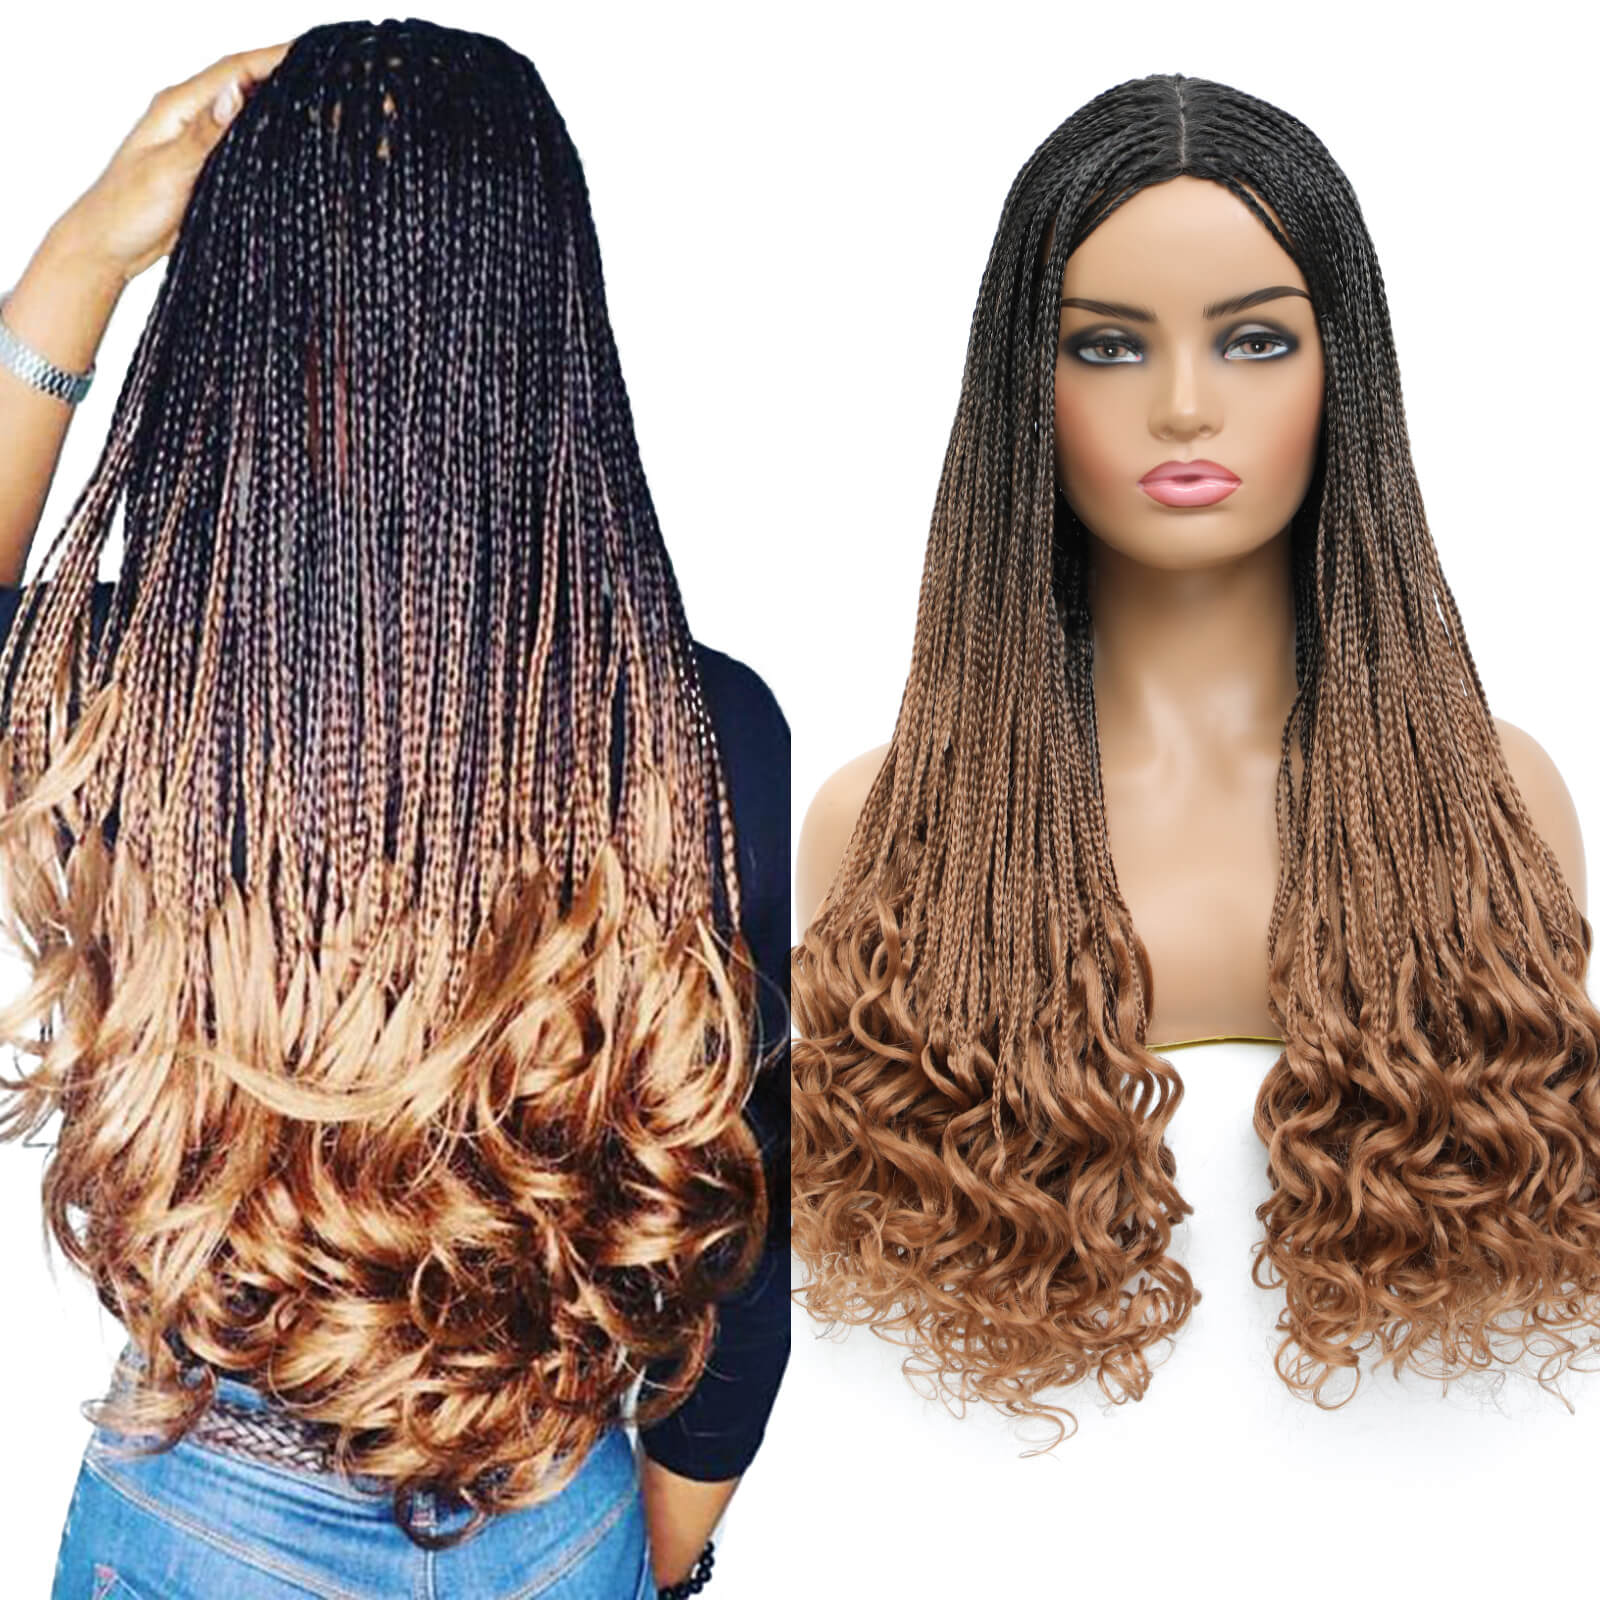 Ombre Brown Box Braided Wigs 30' Long Micro Braids with Curly Ends